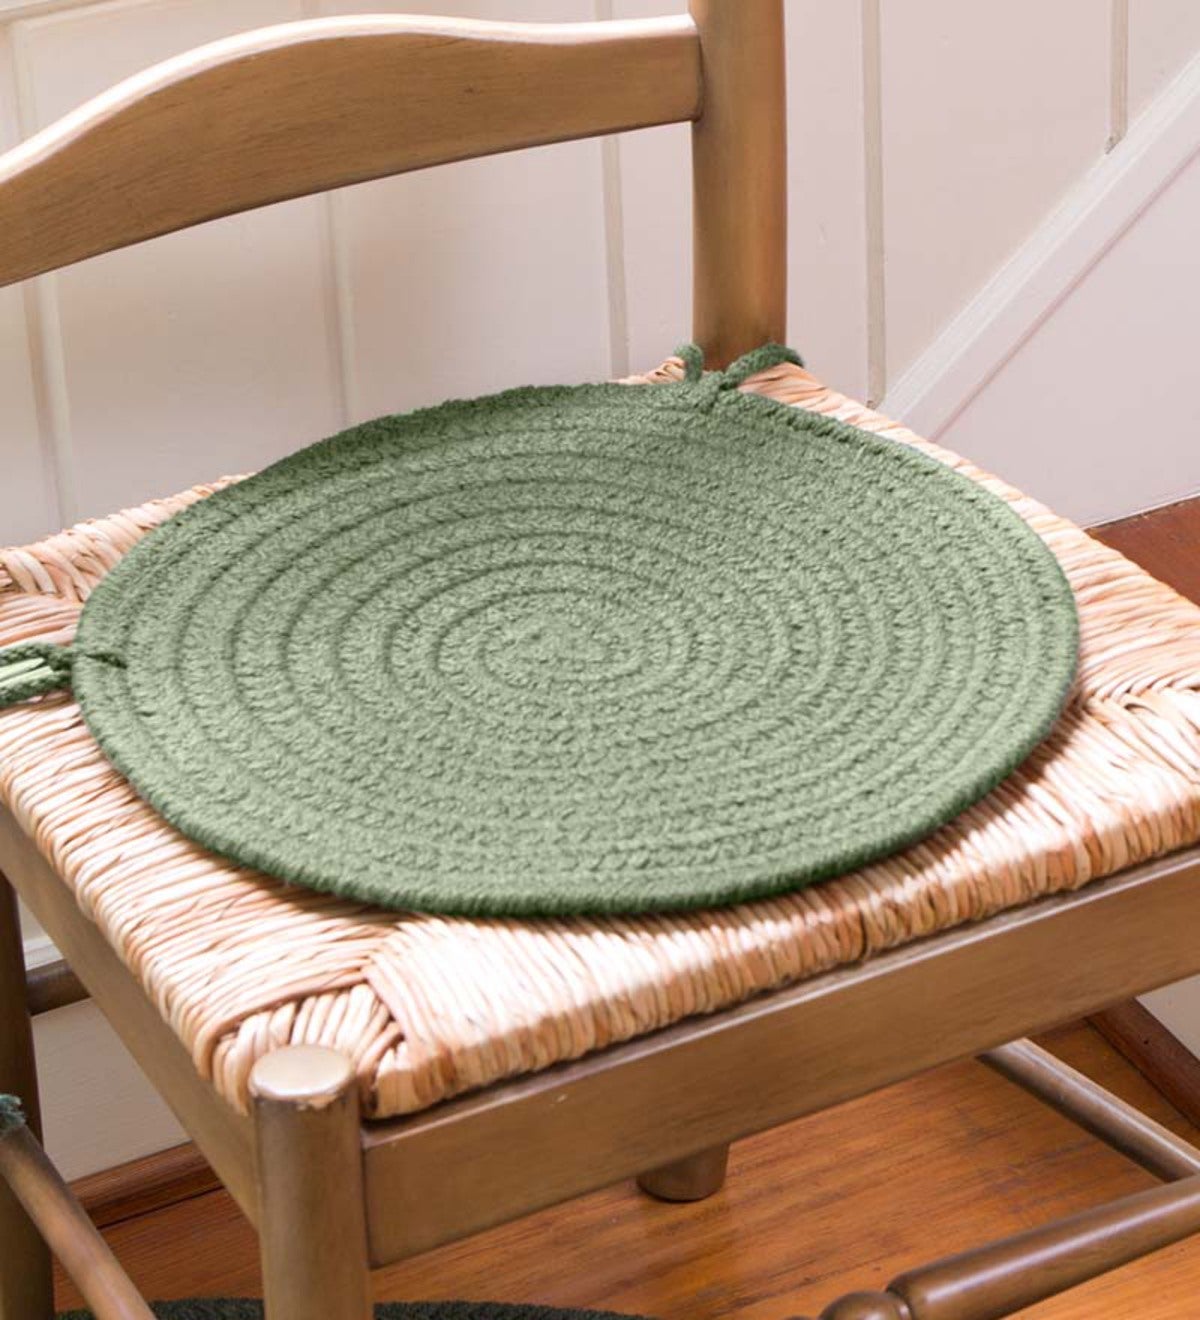 Solid Color Country Classic Braided Polypropylene Chair Pad, 15" dia.